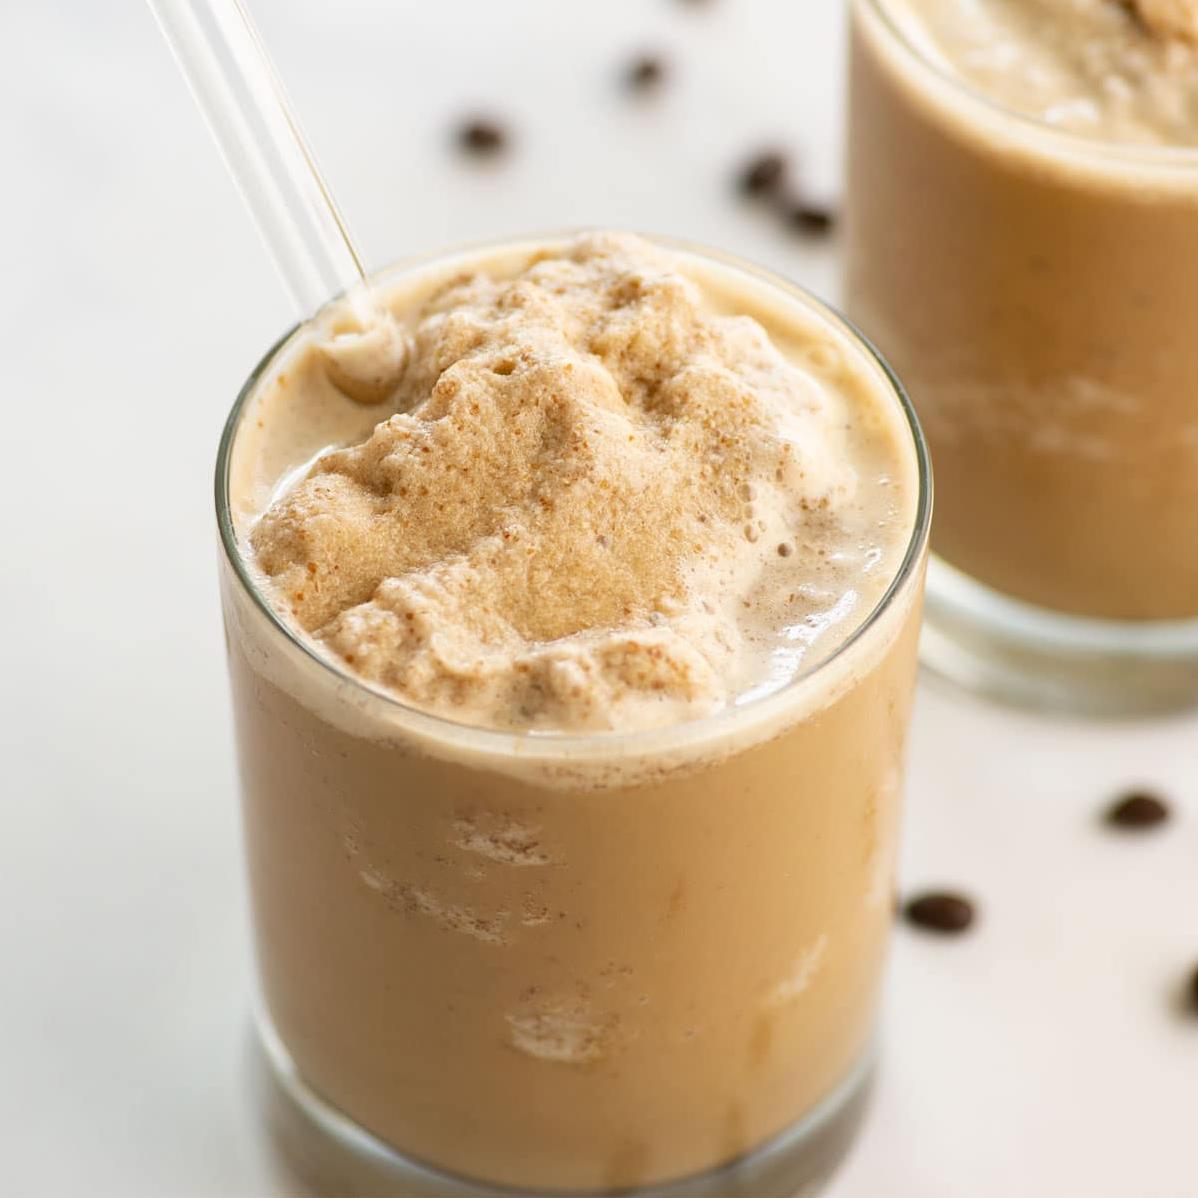  Take a break from the heat with this cool and creamy drink.